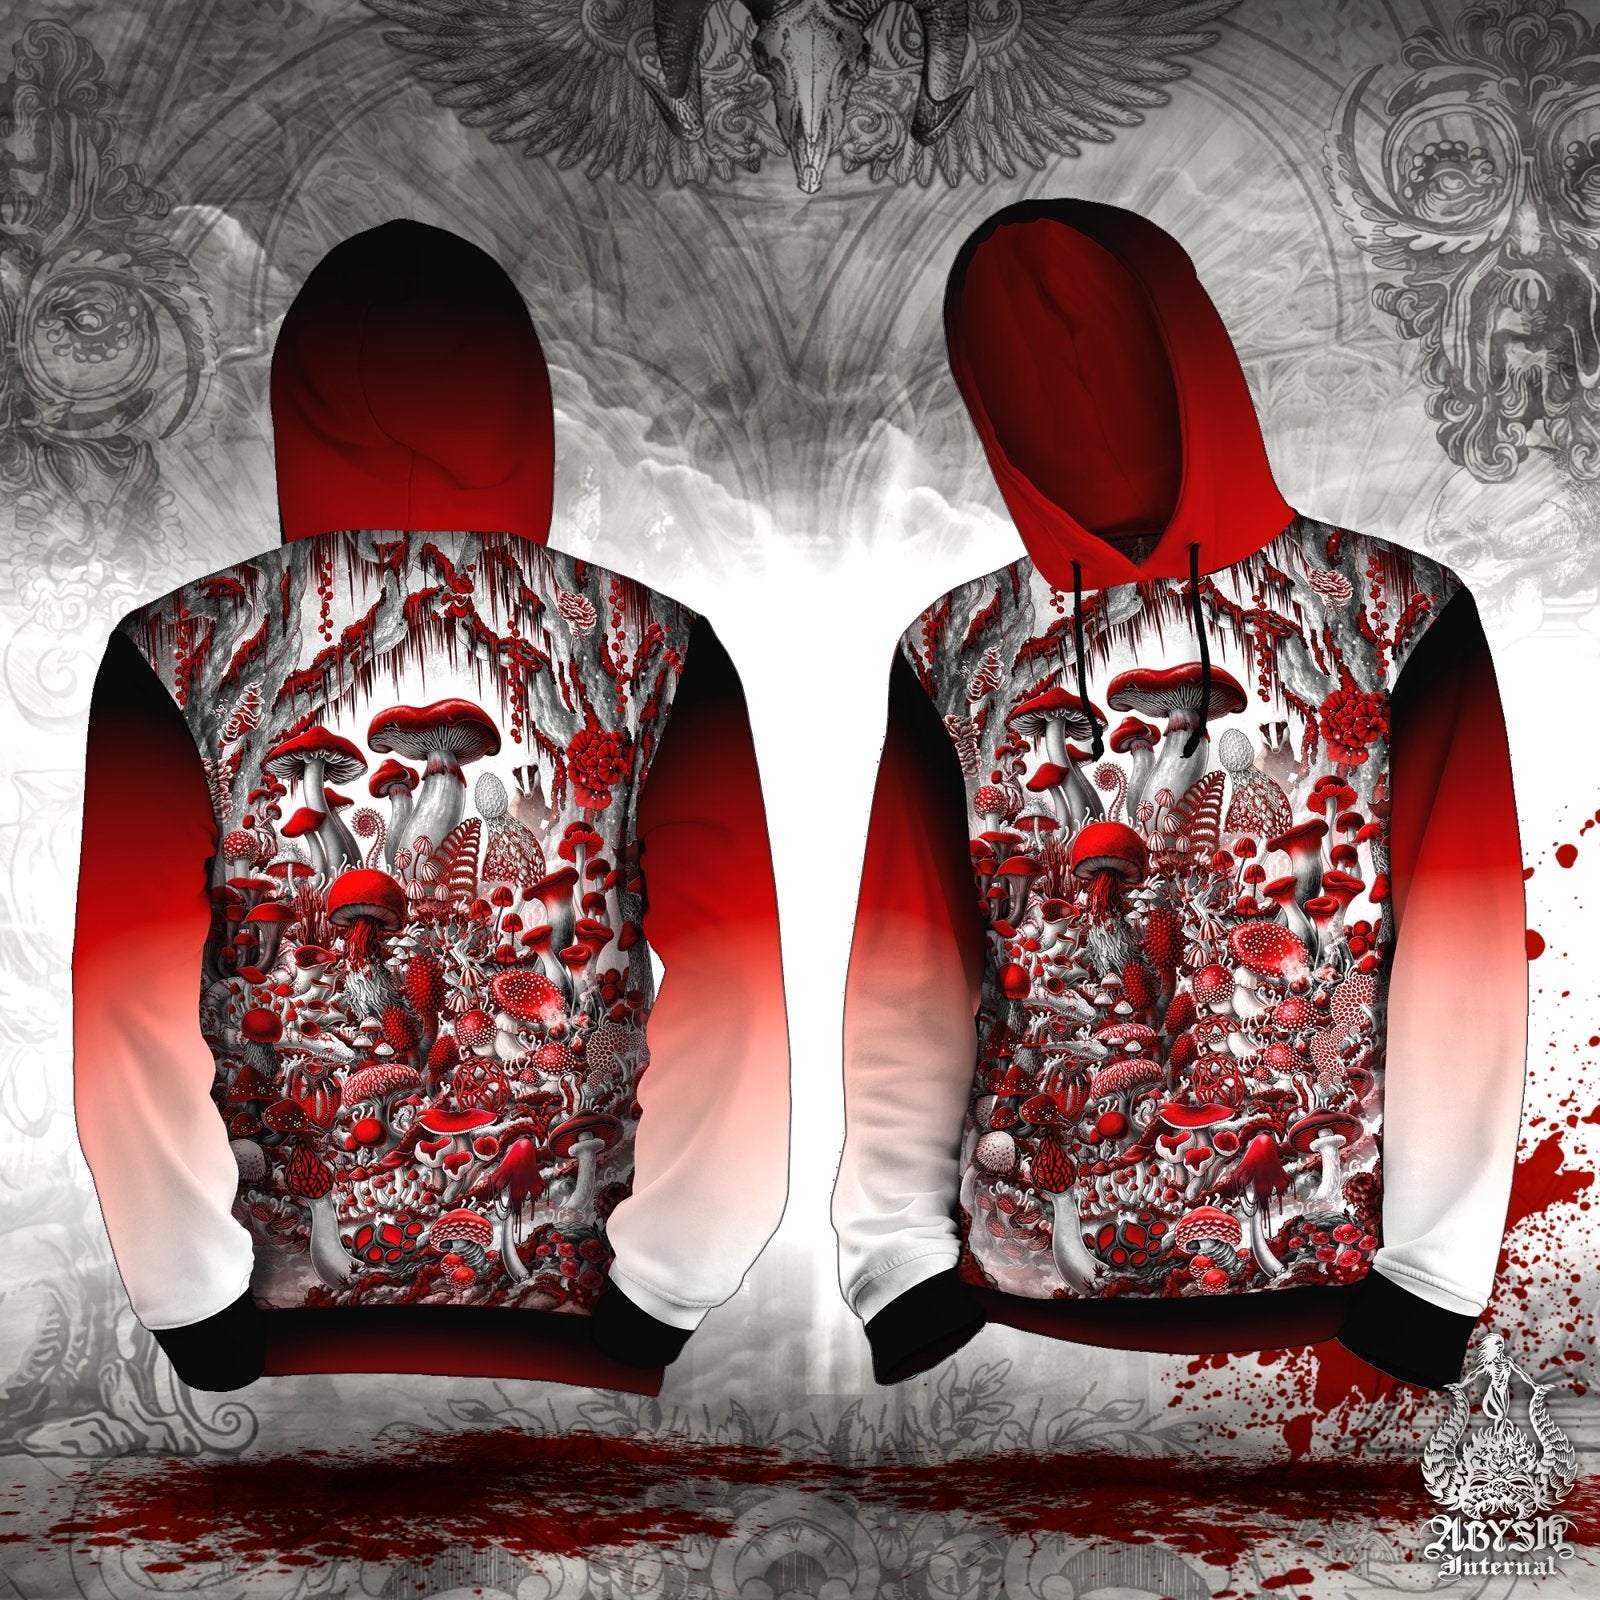 Gothic Mushrooms Hoodie, White Goth Outfit, Magic Shrooms, Indie Festival Streetwear, Alternative Clothing, Unisex - Bloody Red - Abysm Internal